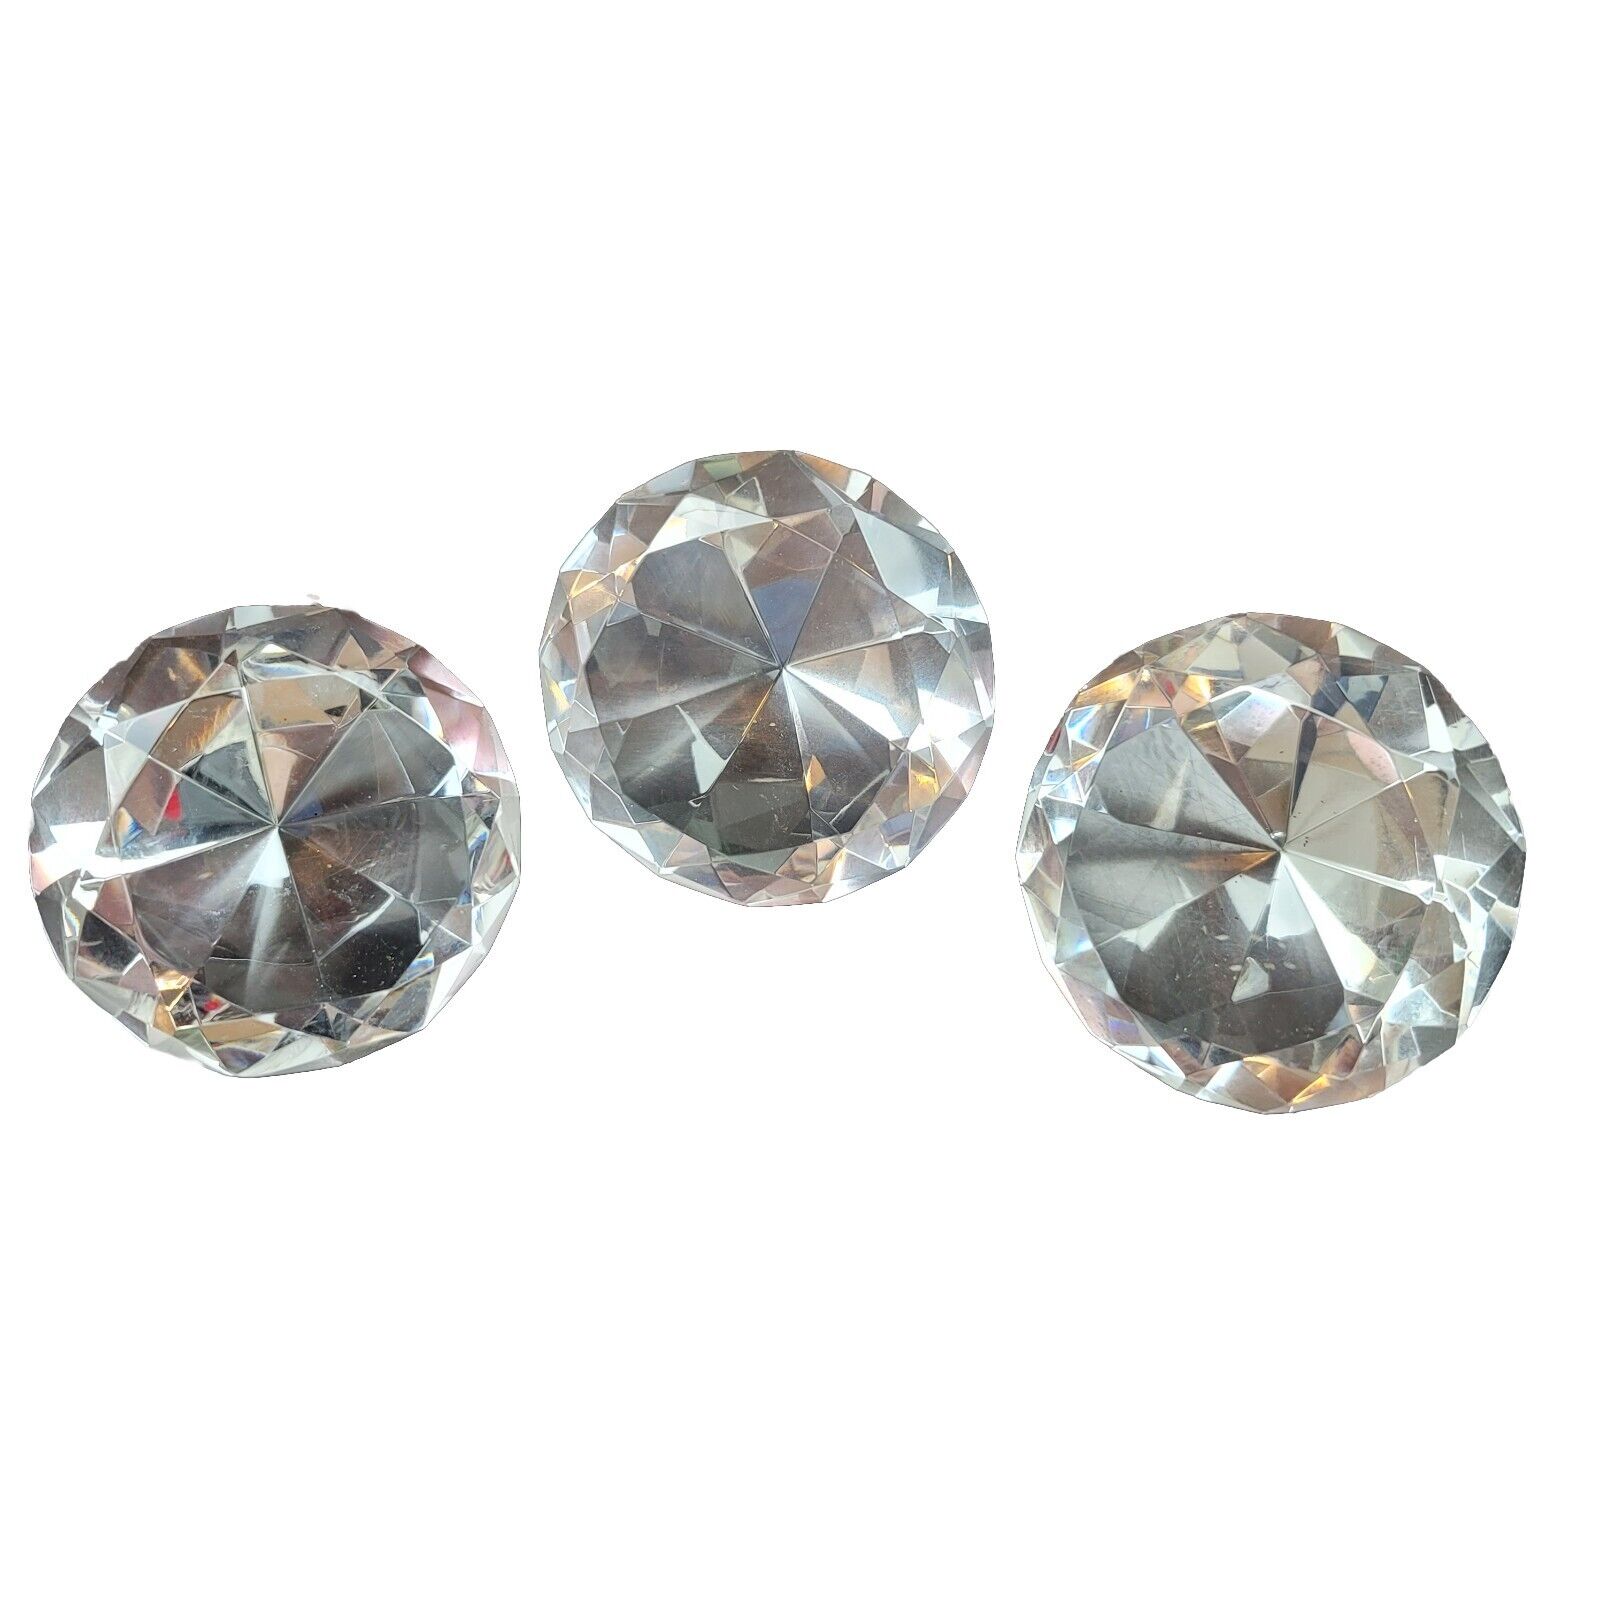 Set of 3 Faceted Round Clear Glass Diamond Cut Paperweight Art Glass 3in 80mm